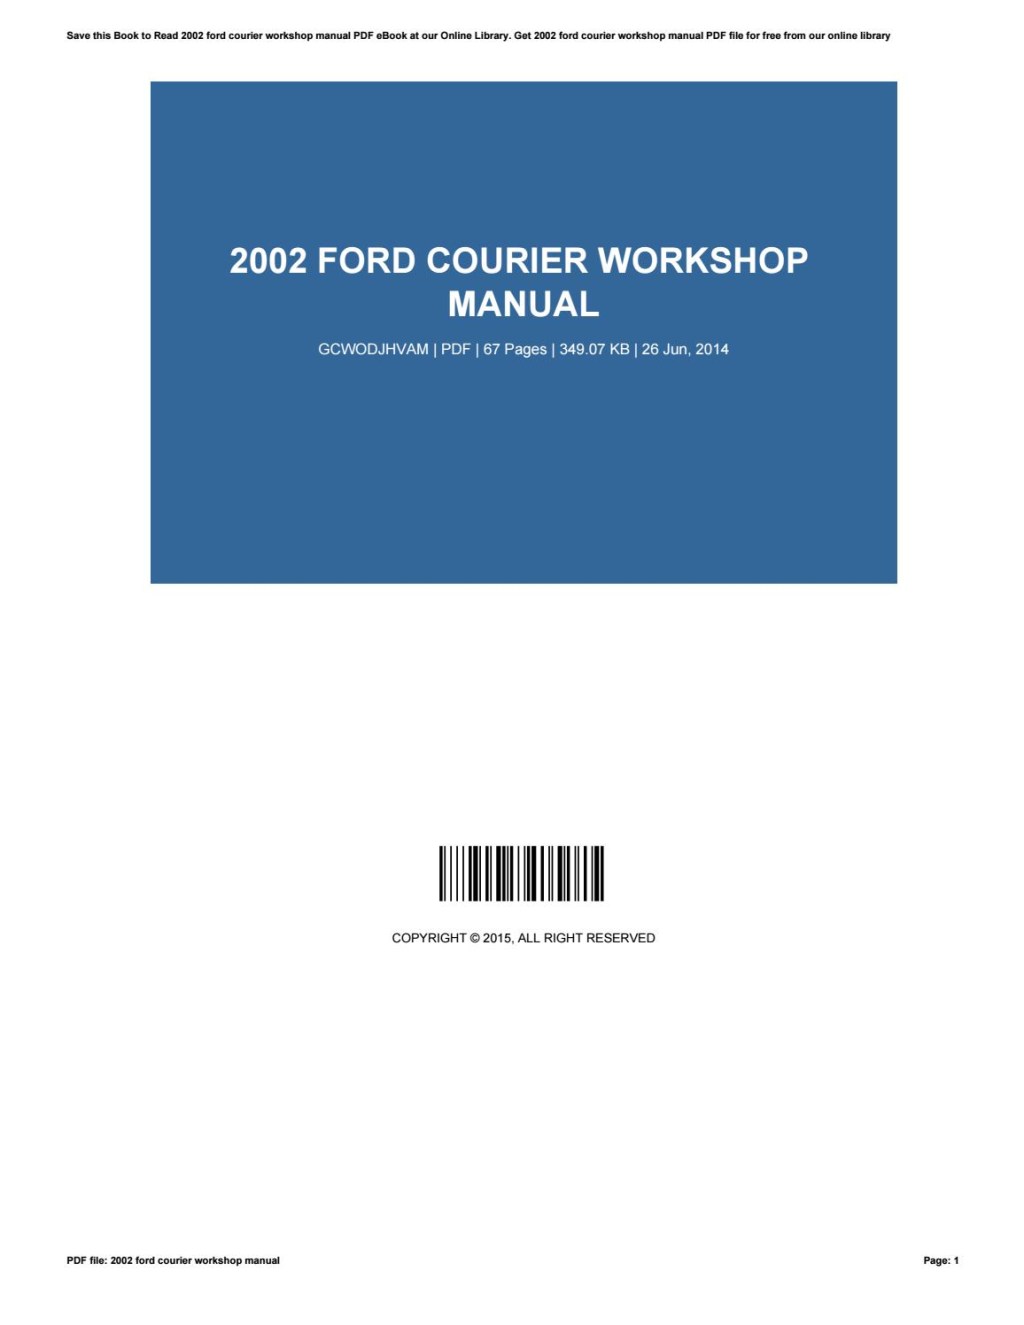 Picture of: ford courier workshop manual by KimJames – Issuu